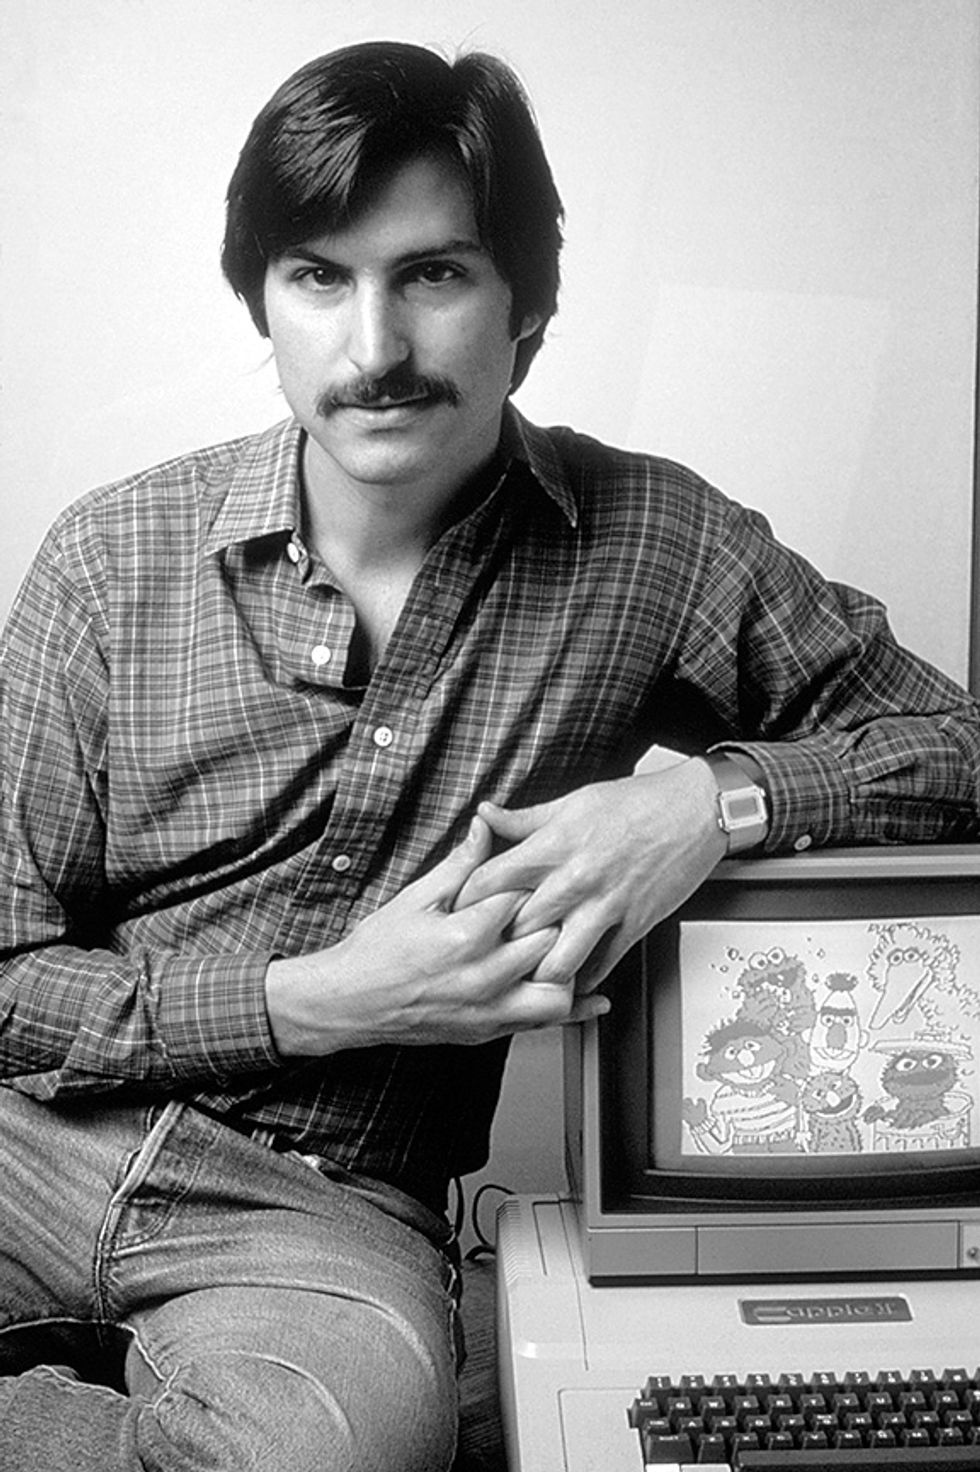 Steve Jobs with an Apple II personal computer in 1981. 